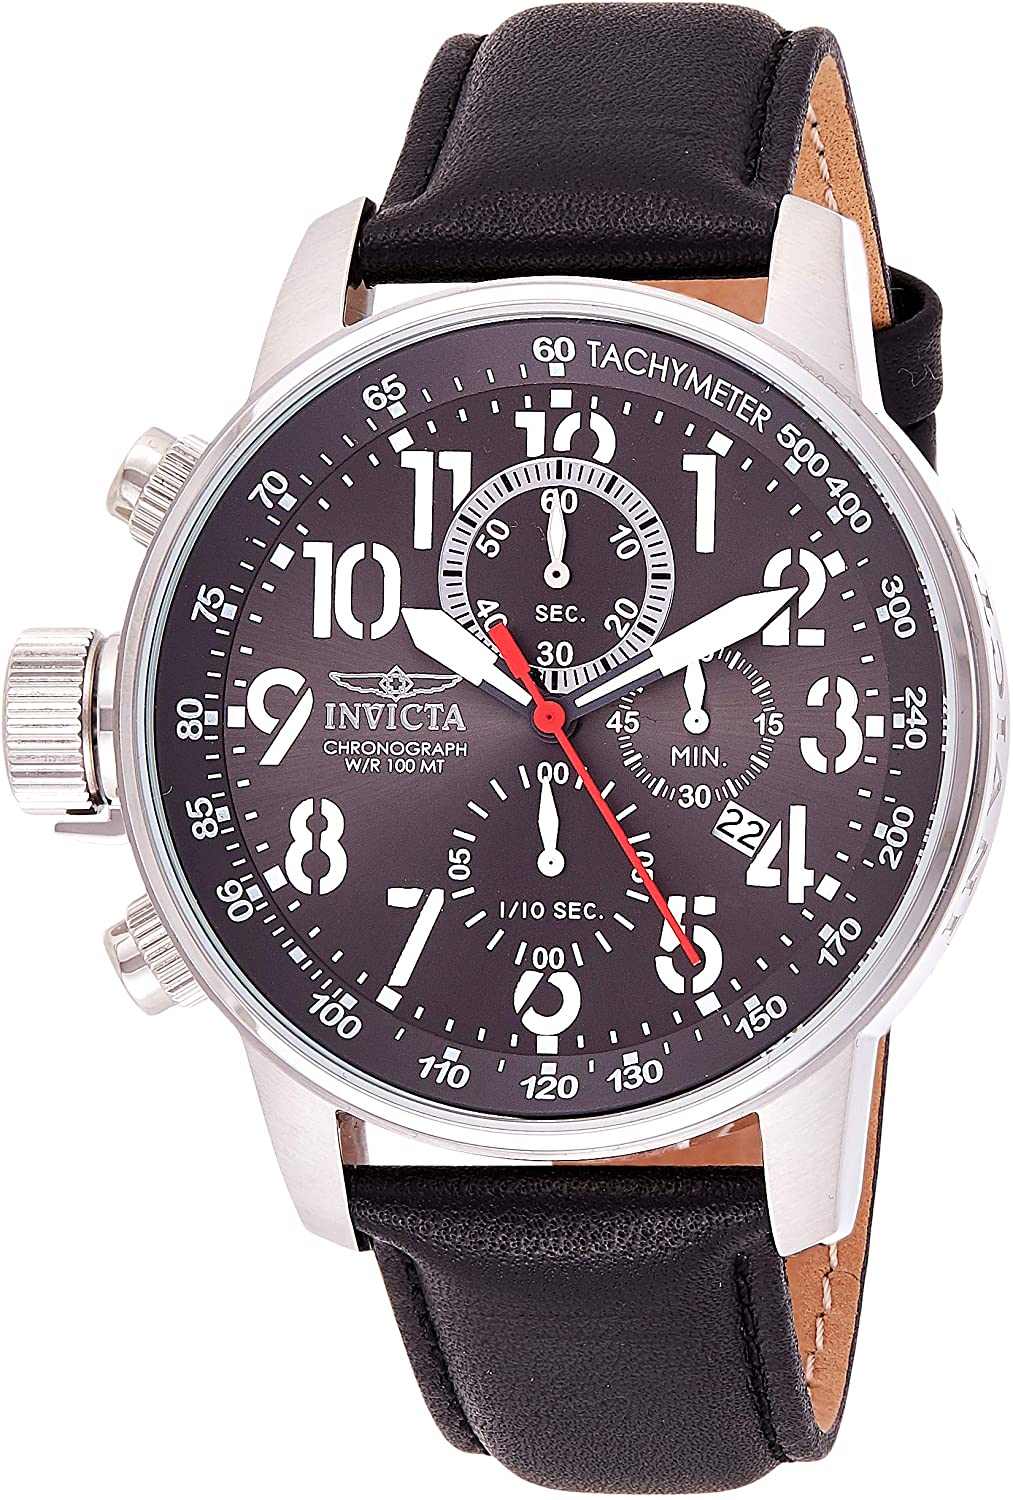 Invicta Men's Connection Stainless Steel Quartz Watch with Leather Calfskin Strap, Black, 22 (Model: 24736)